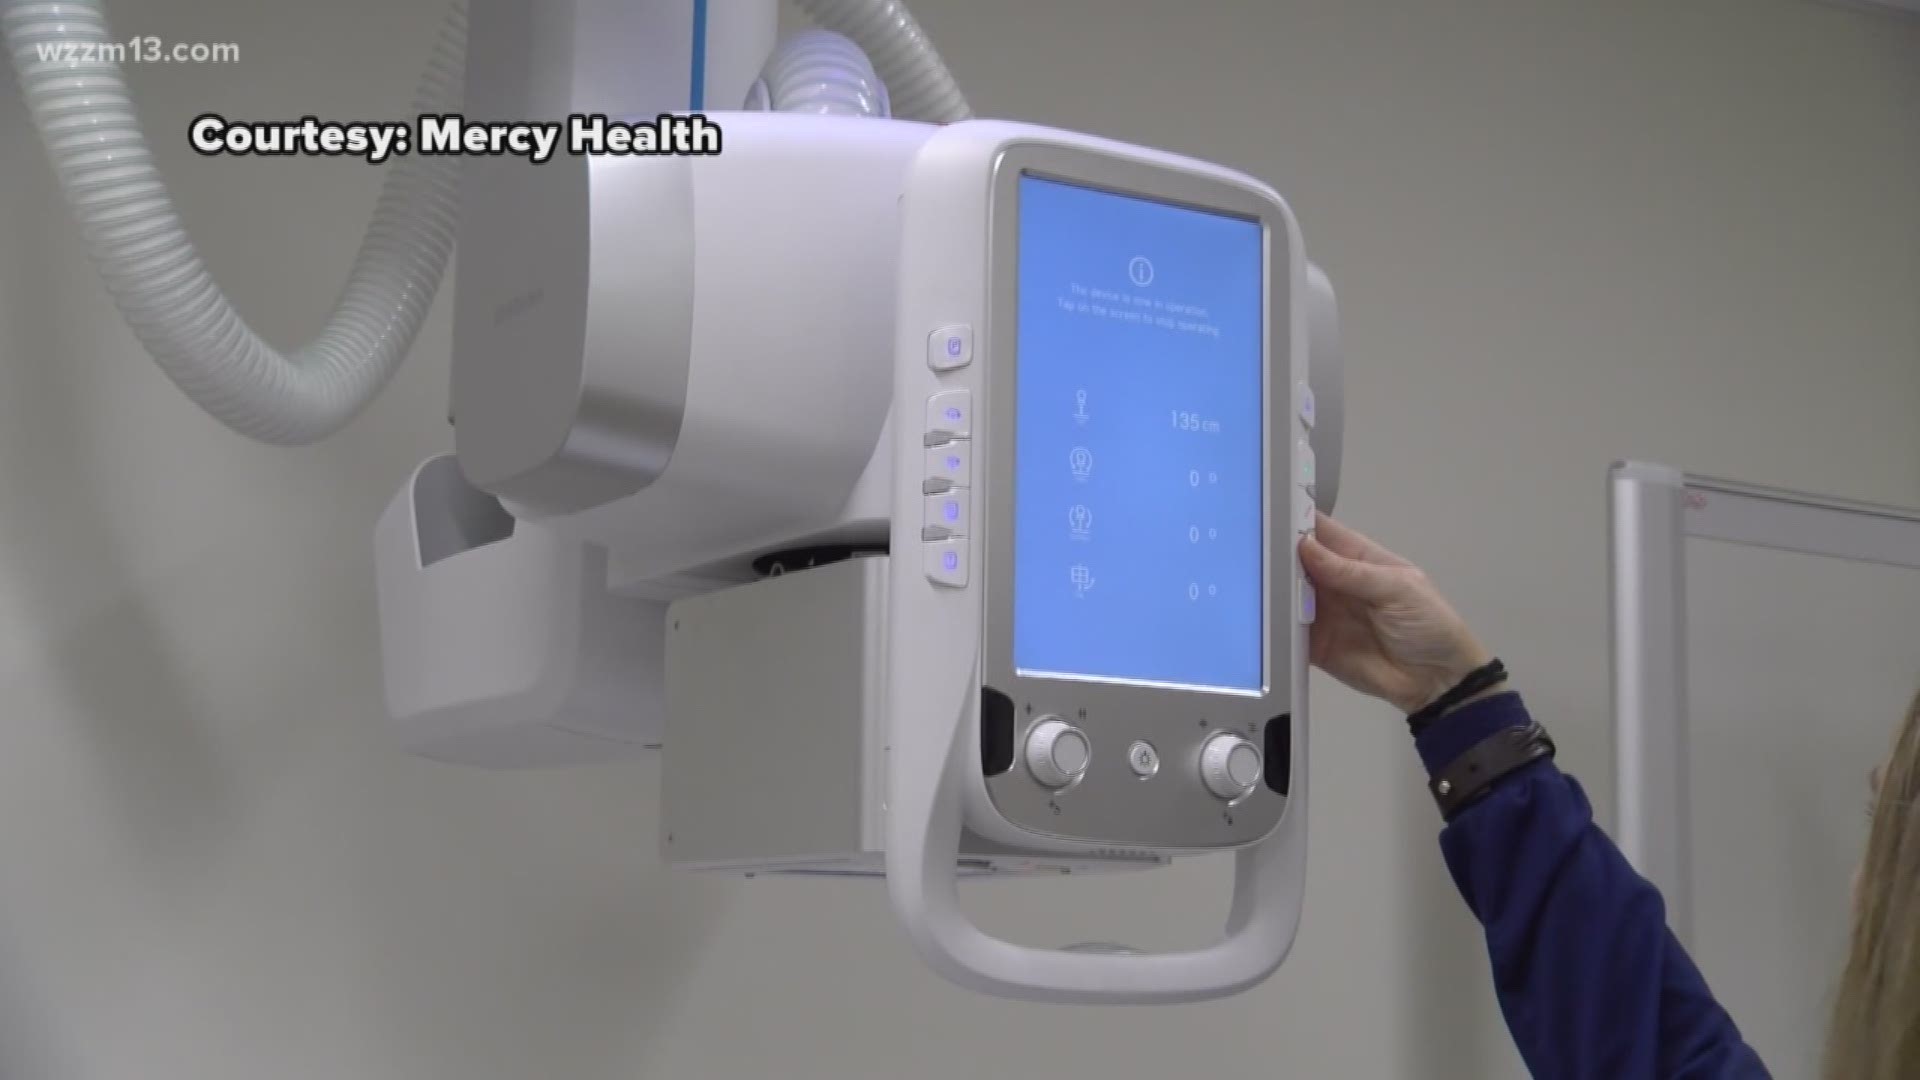 New Mercy Health facility opens in Hudsonville